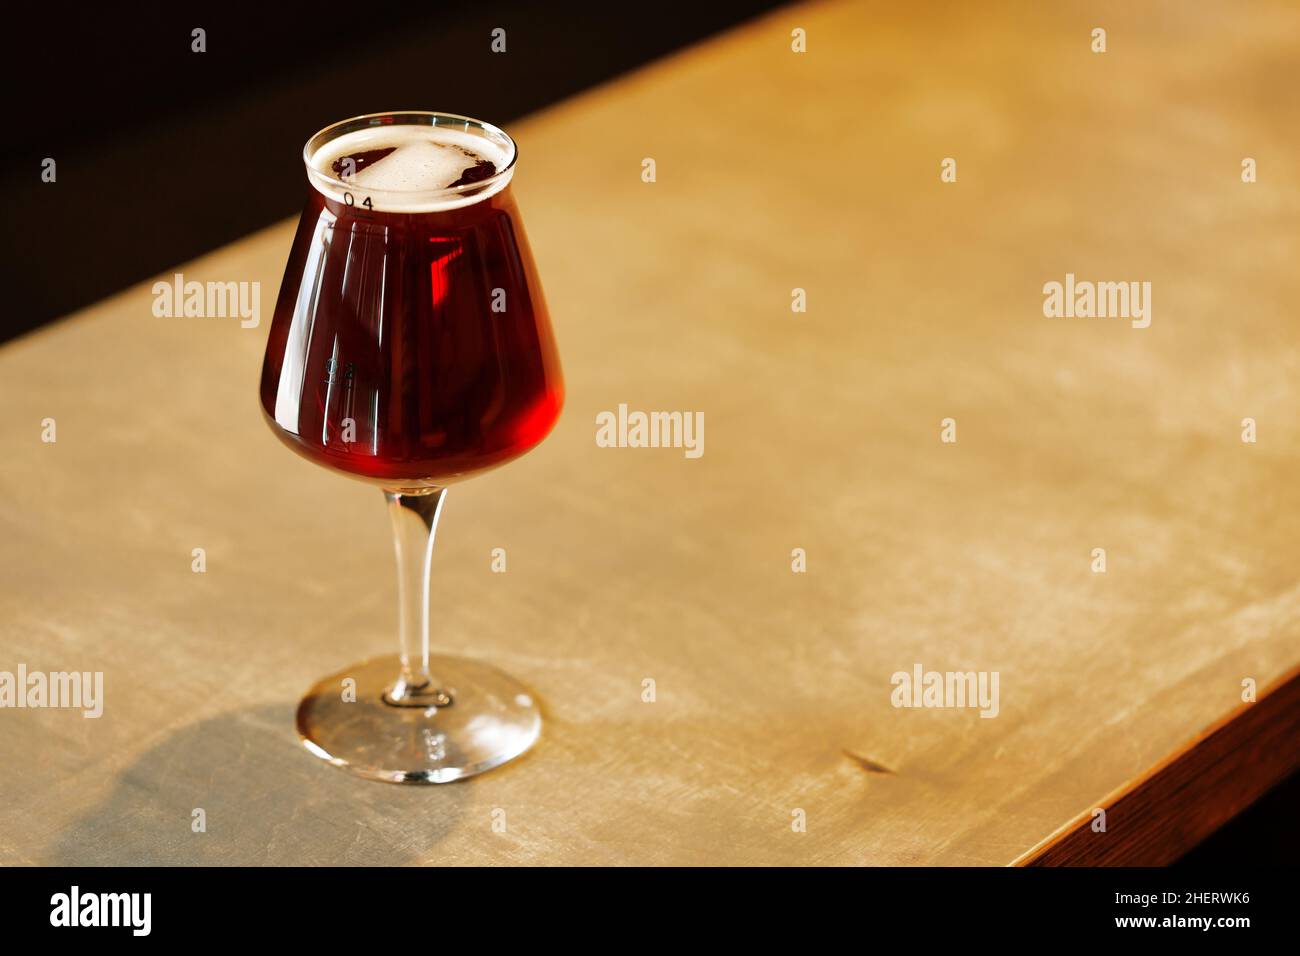 Glass with tasty red amber ale craft beer on table. Teku stemmed beer glass. Stock Photo